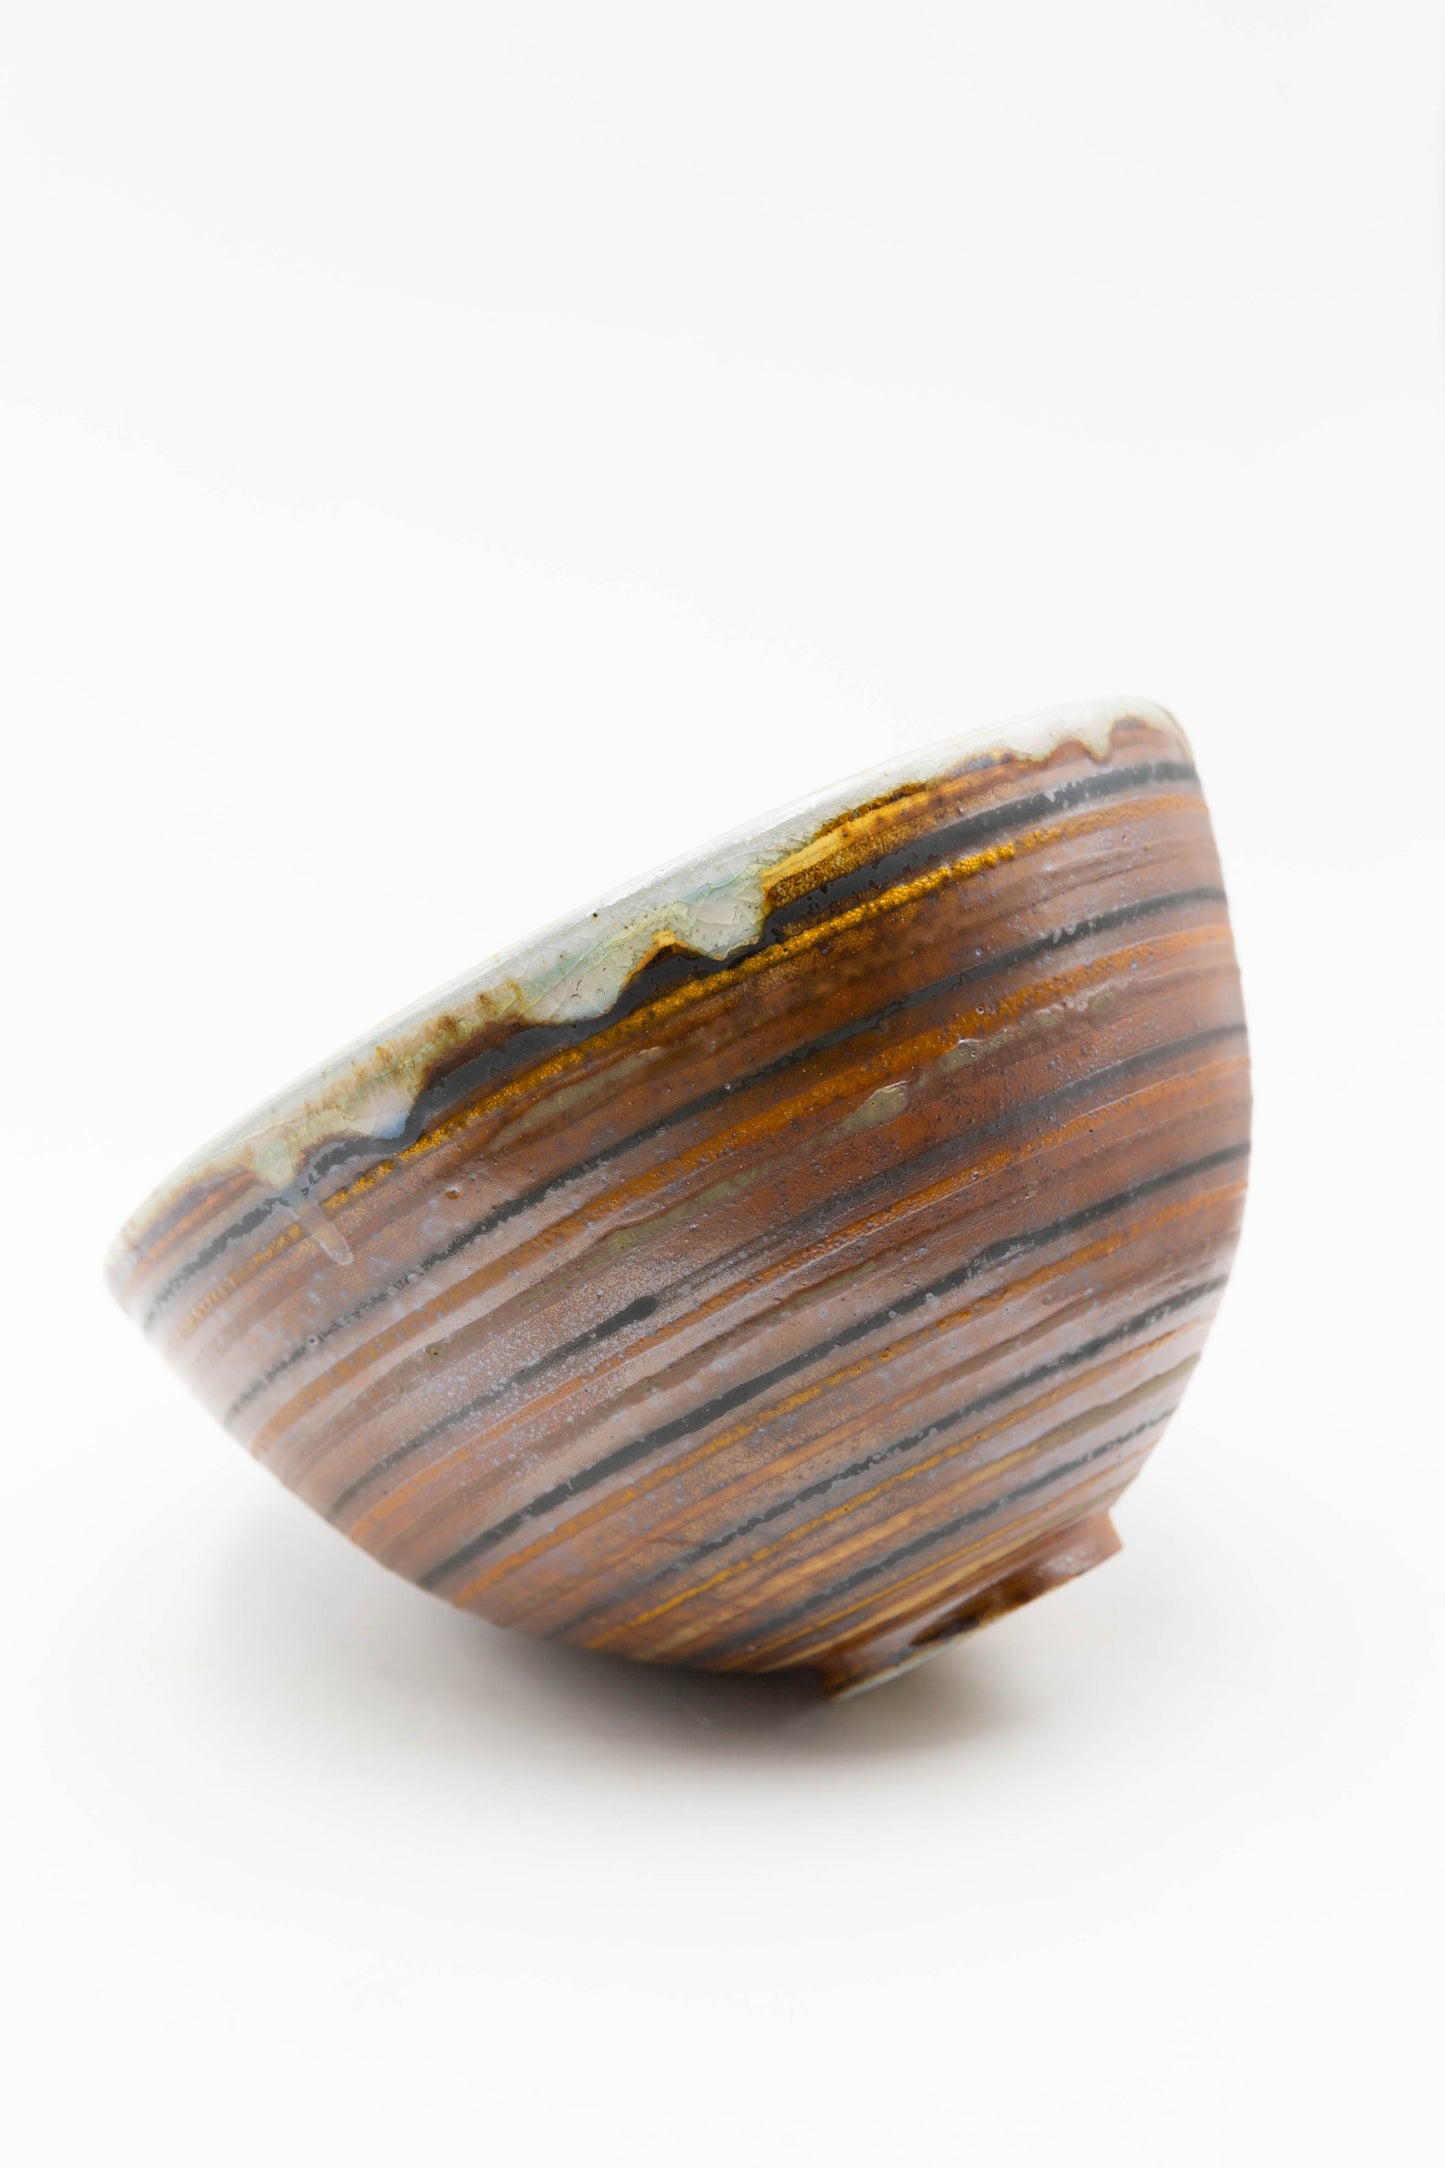 Wood Fired Bowl 017